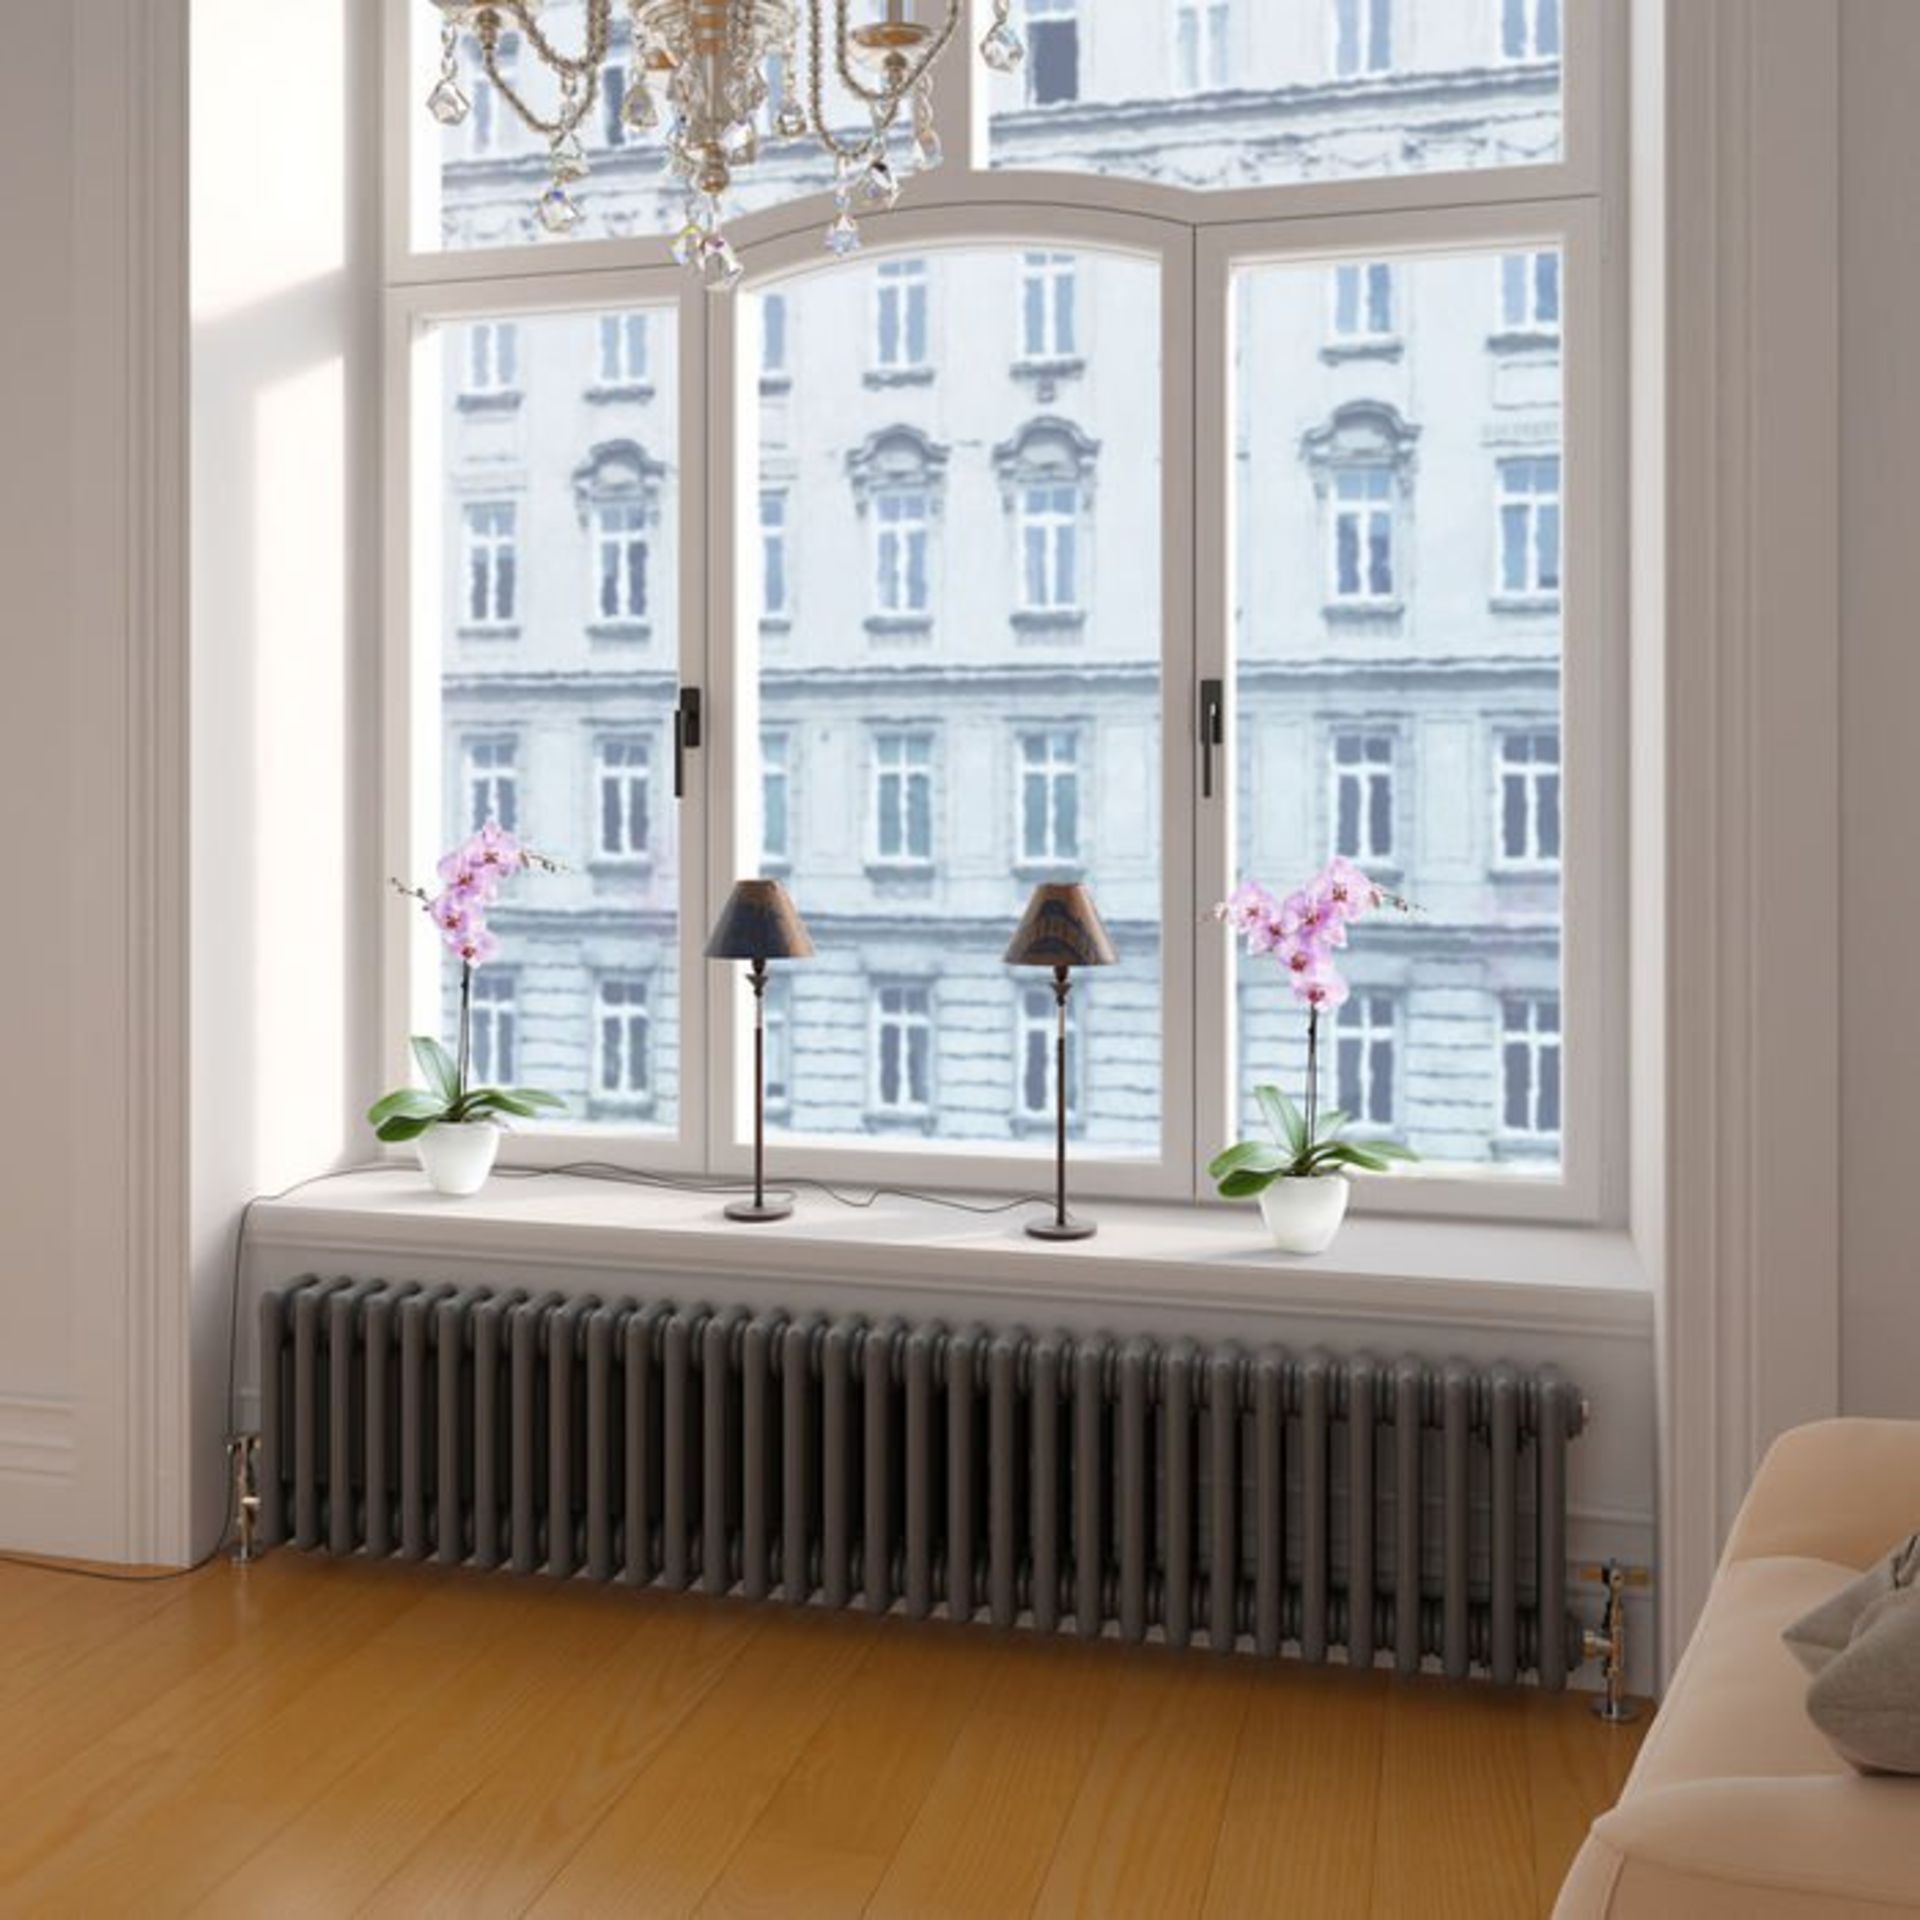 (L147) 300x1458mm Anthracite Triple Panel Horizontal Colosseum Traditional Radiator. RRP £649.99. - Image 2 of 3